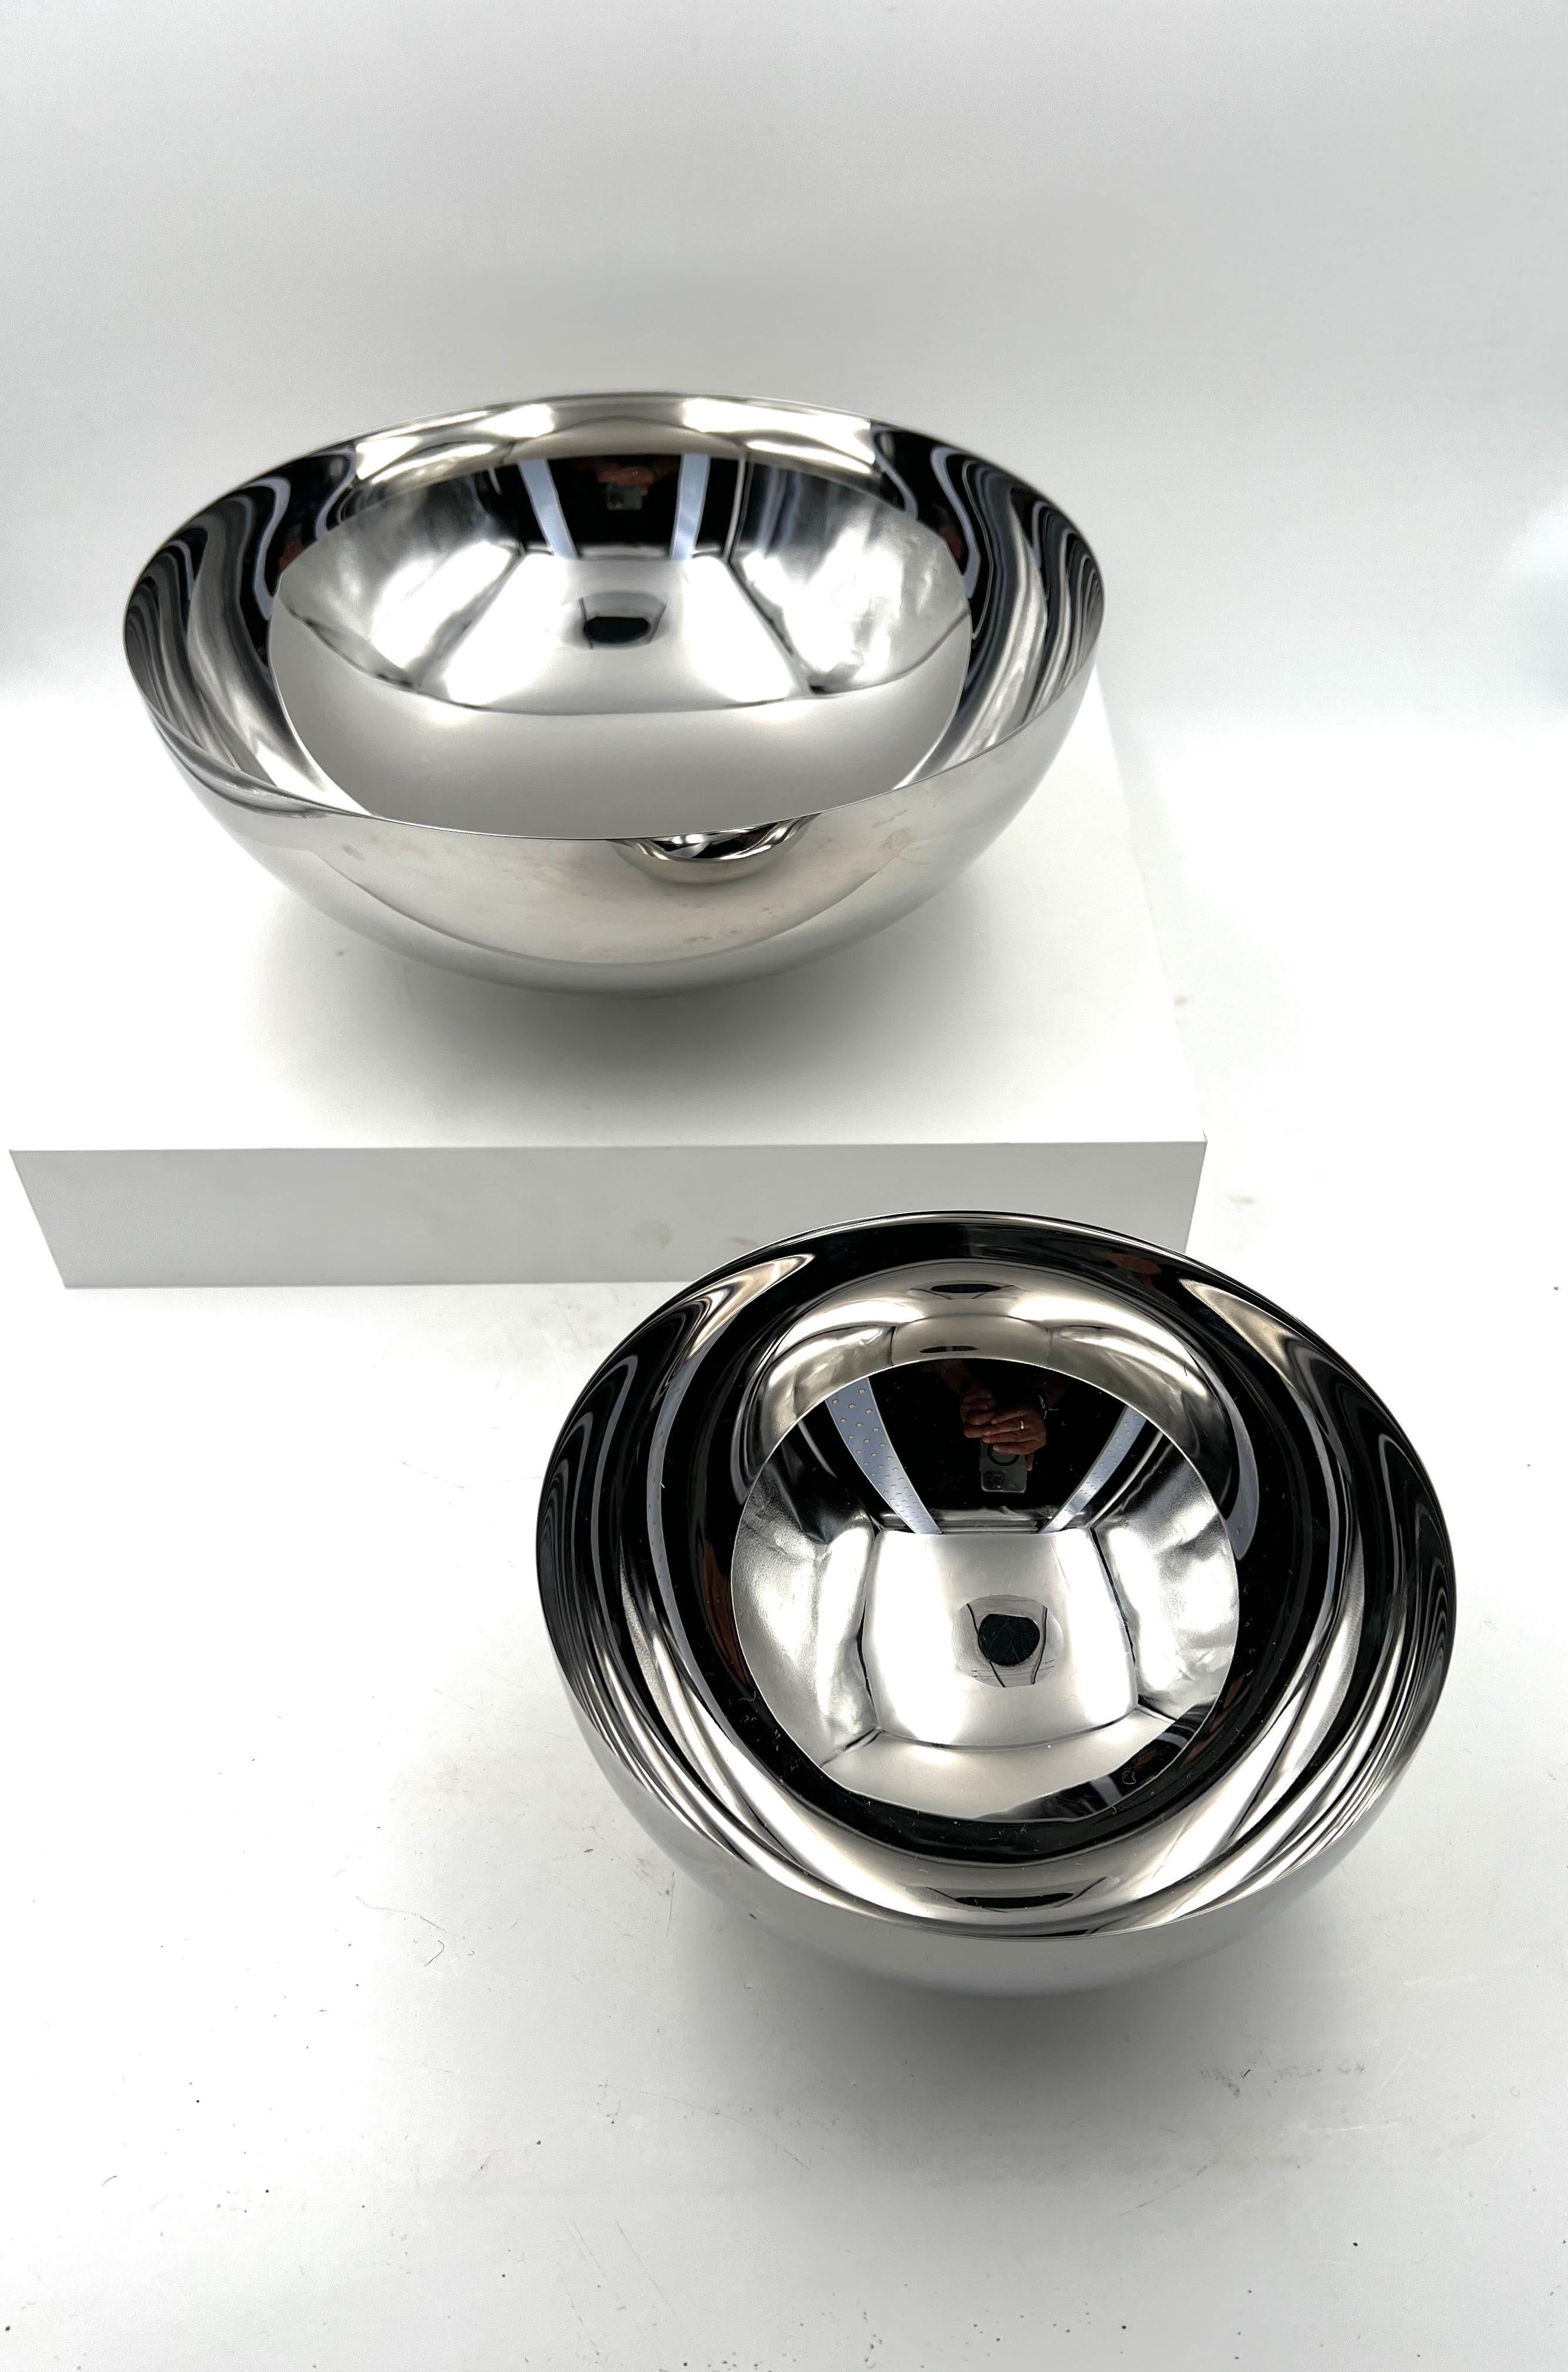 Danish Pair of Elegant Polished Stainless Steel Footed Bowls by Georg Jensen Denmark For Sale